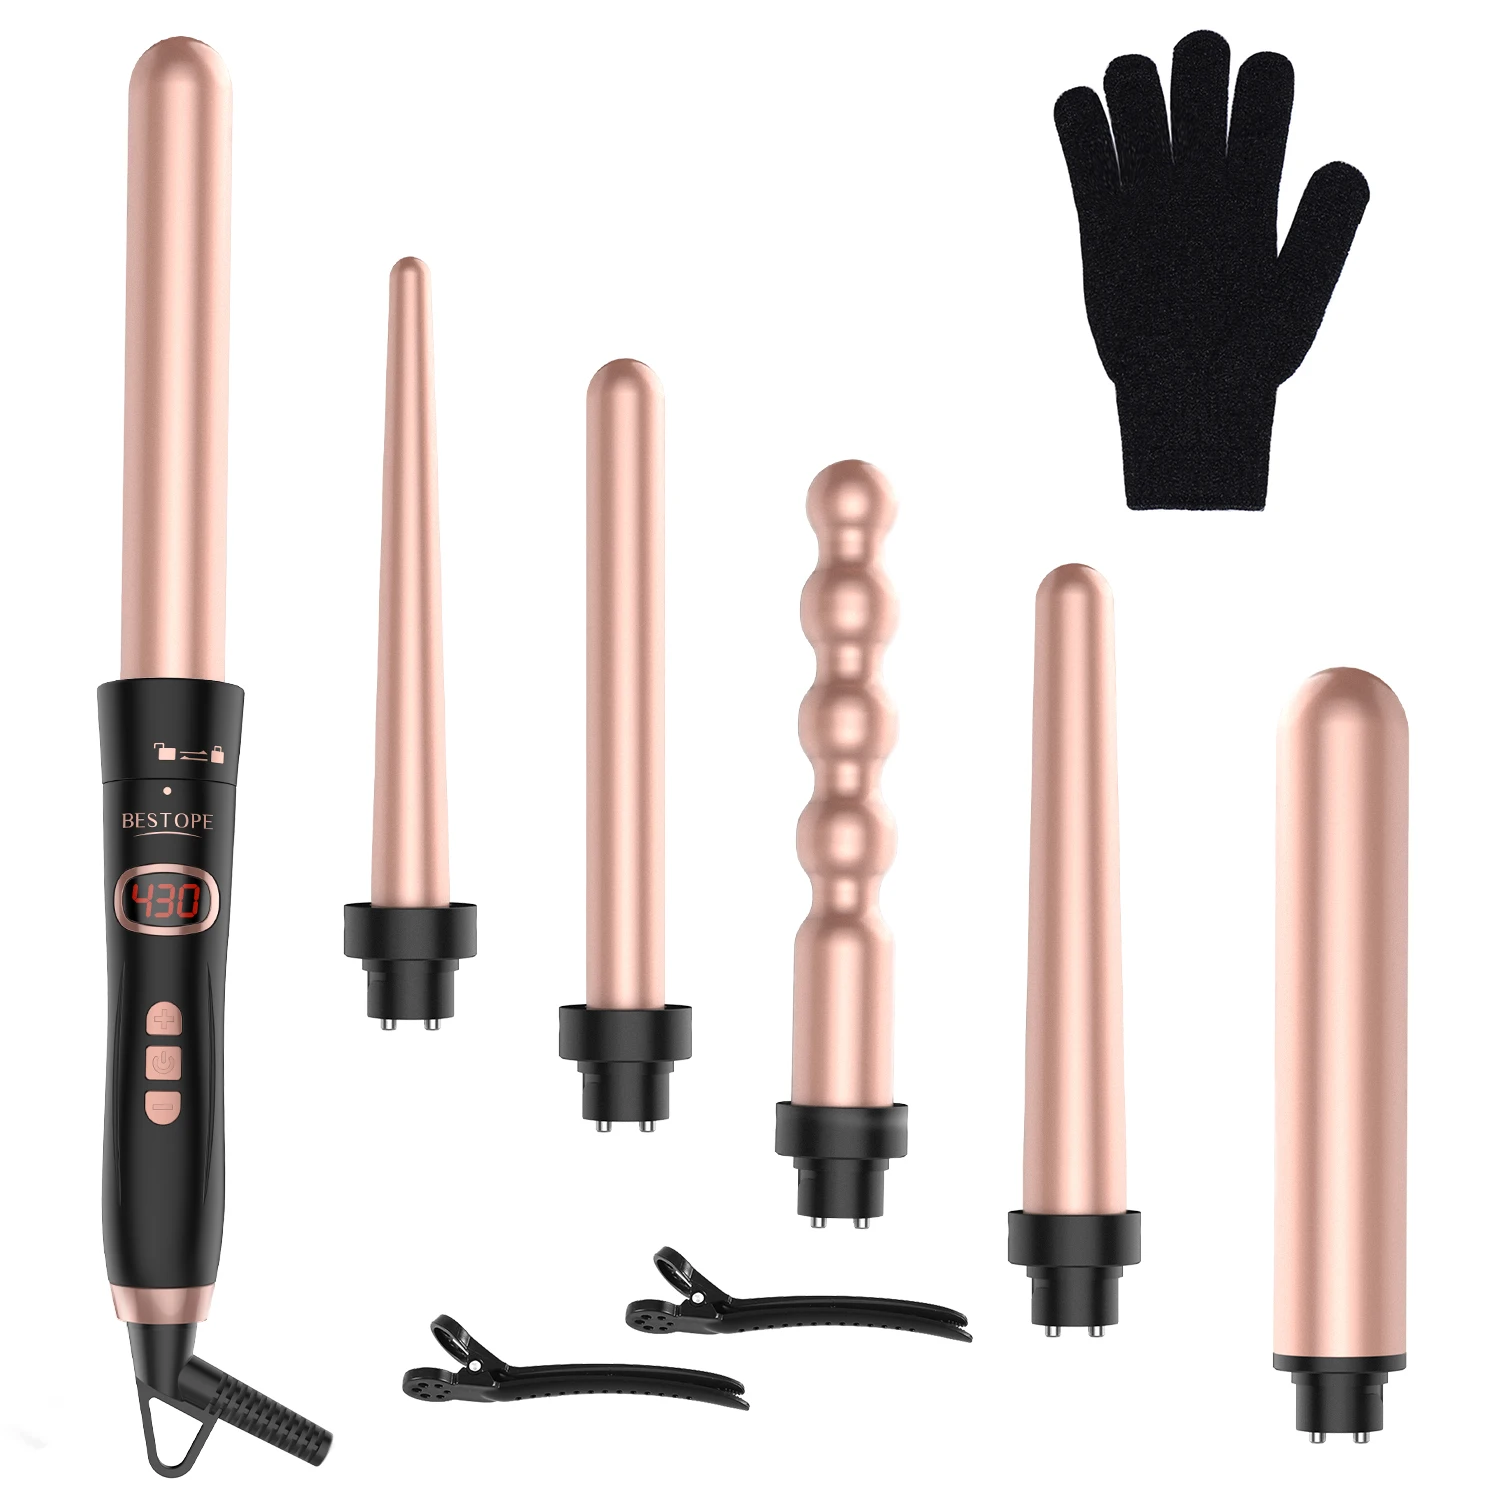 

Professional 6 in 1 Hair Curler Interchangeable Wand Curling Iron Set from BESTOPE, Rose gold